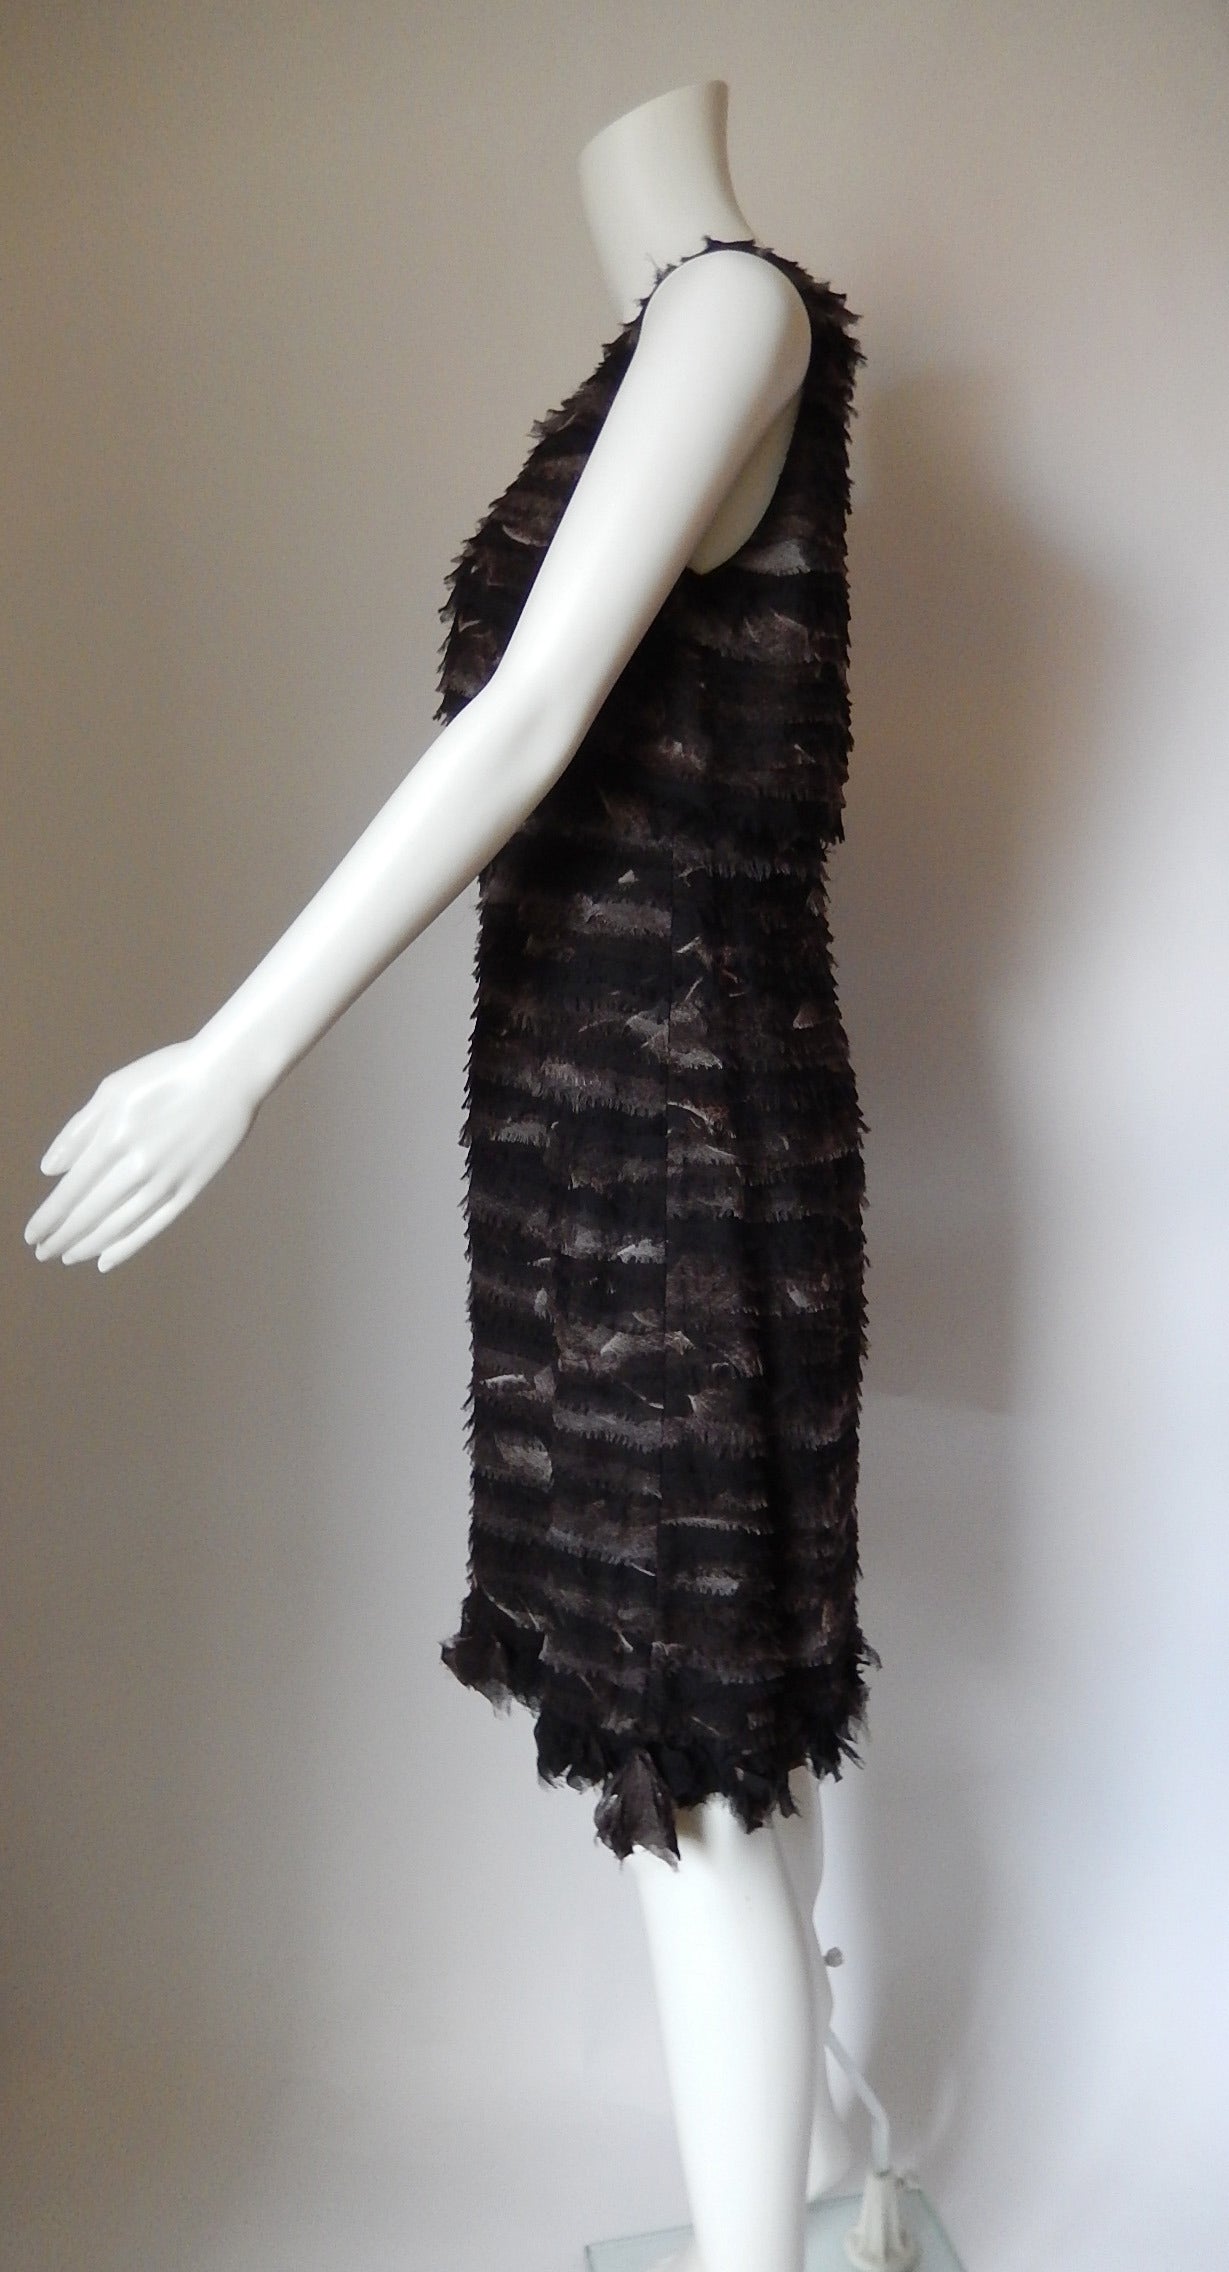 Never worn Chado Ralph Rucci Haute Couture Exquisite Dress
$9,600 at retail
Black/Brown/Grey tiered dress with fringed edges 
Bottom is all pieced ruffles sewn to the bottom of the dress
Sleeveless capelet style bodice top which snaps down in